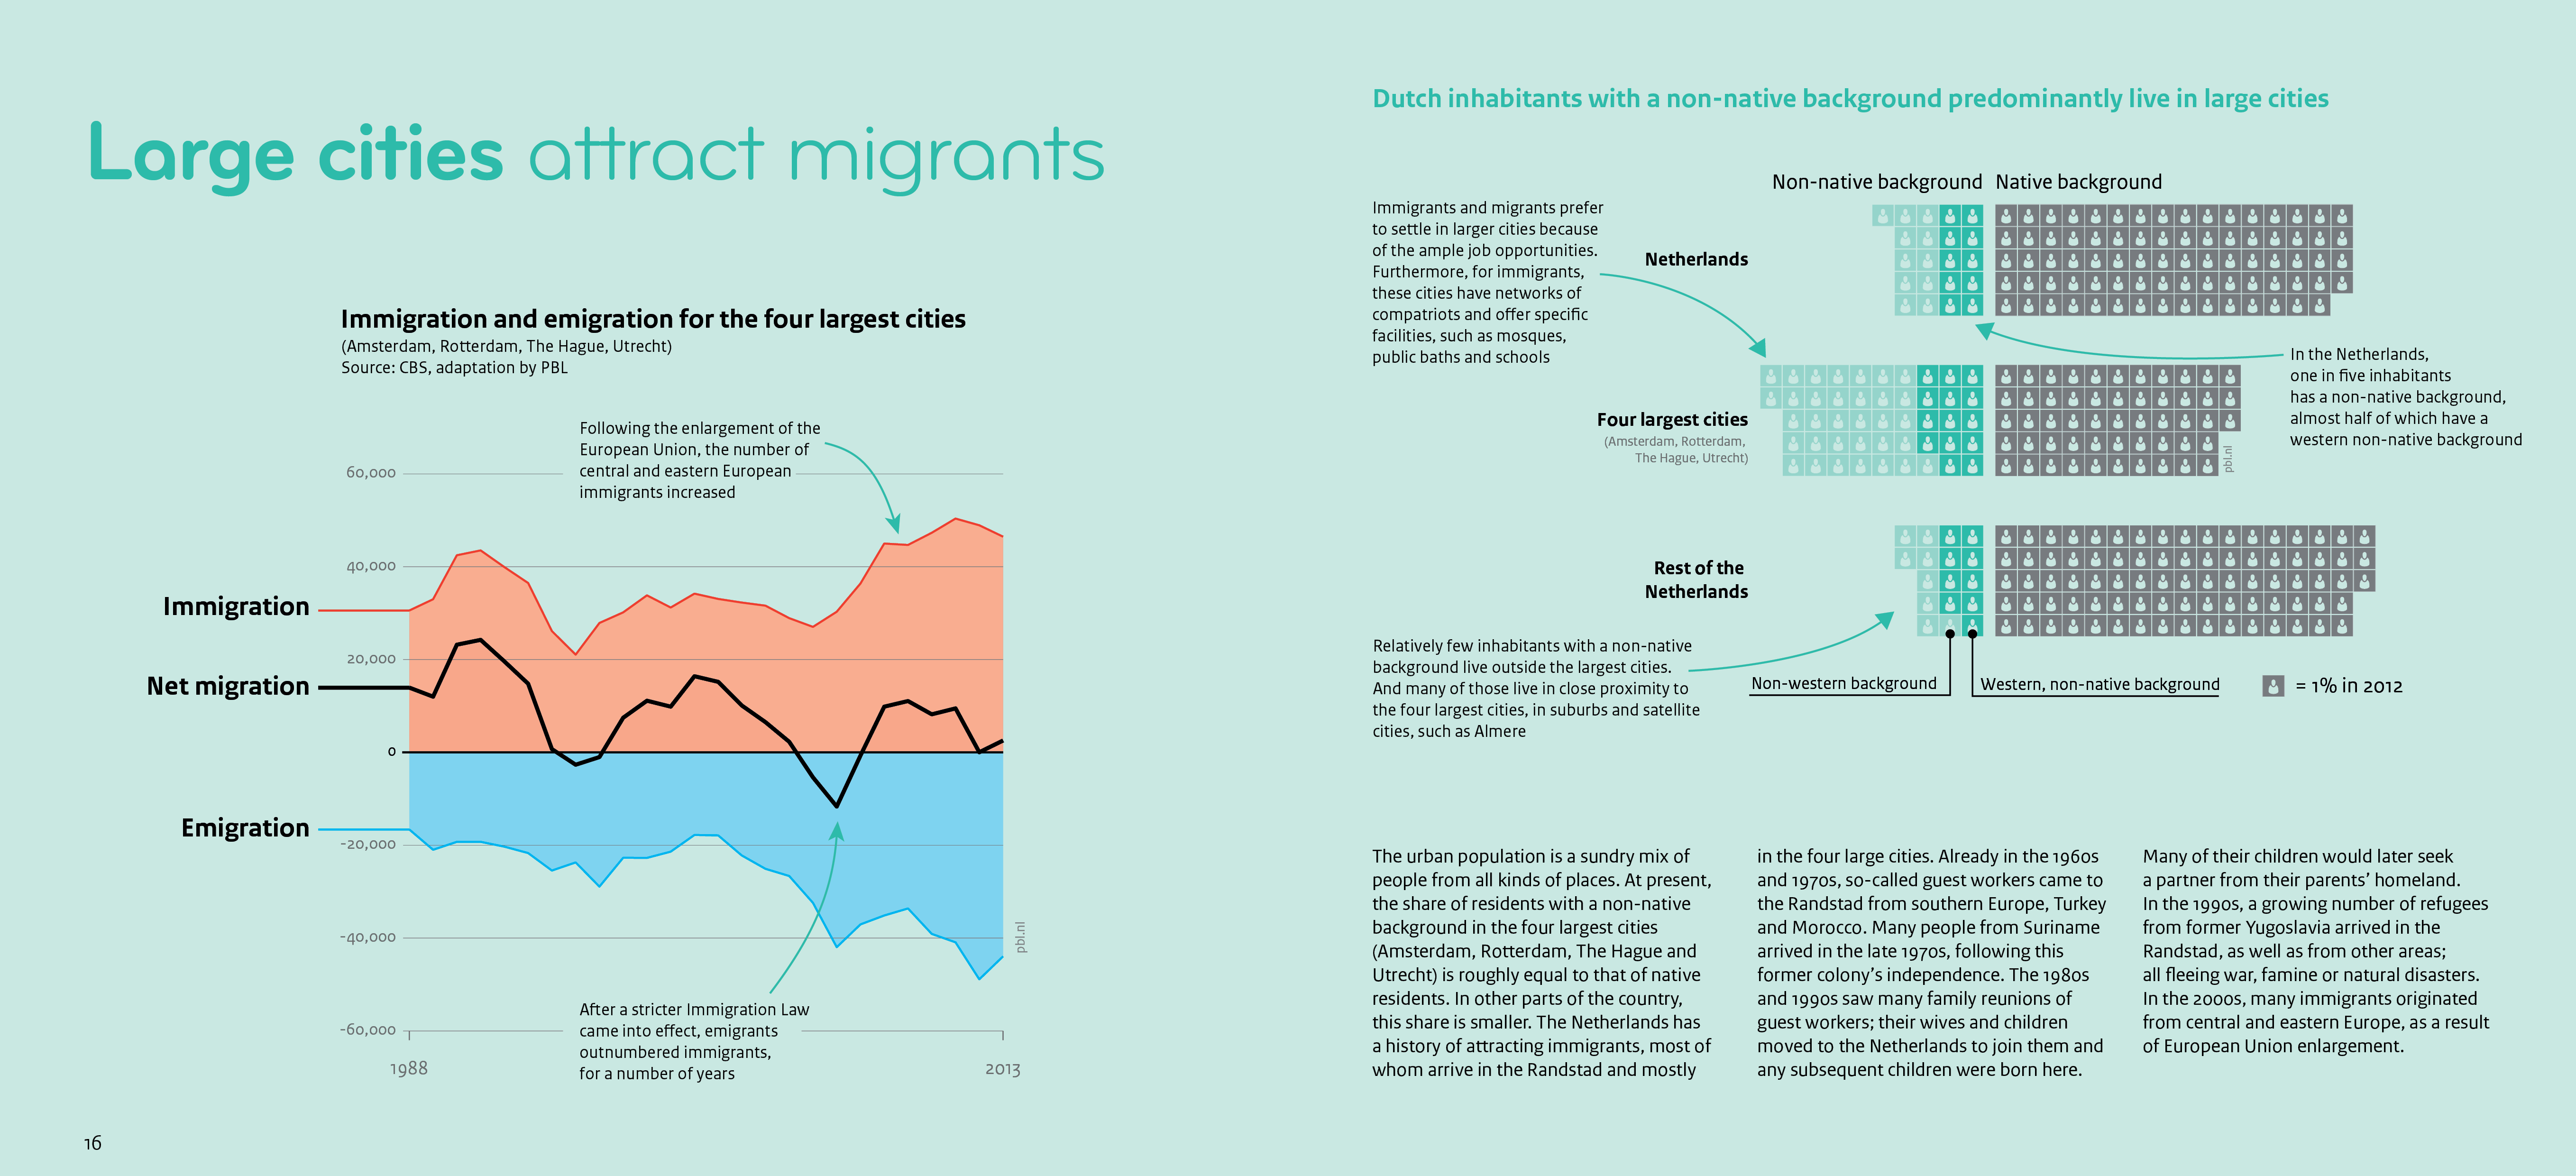 This infographic shows the yearly immigration and emigration rates in the four largest Dutch cities.